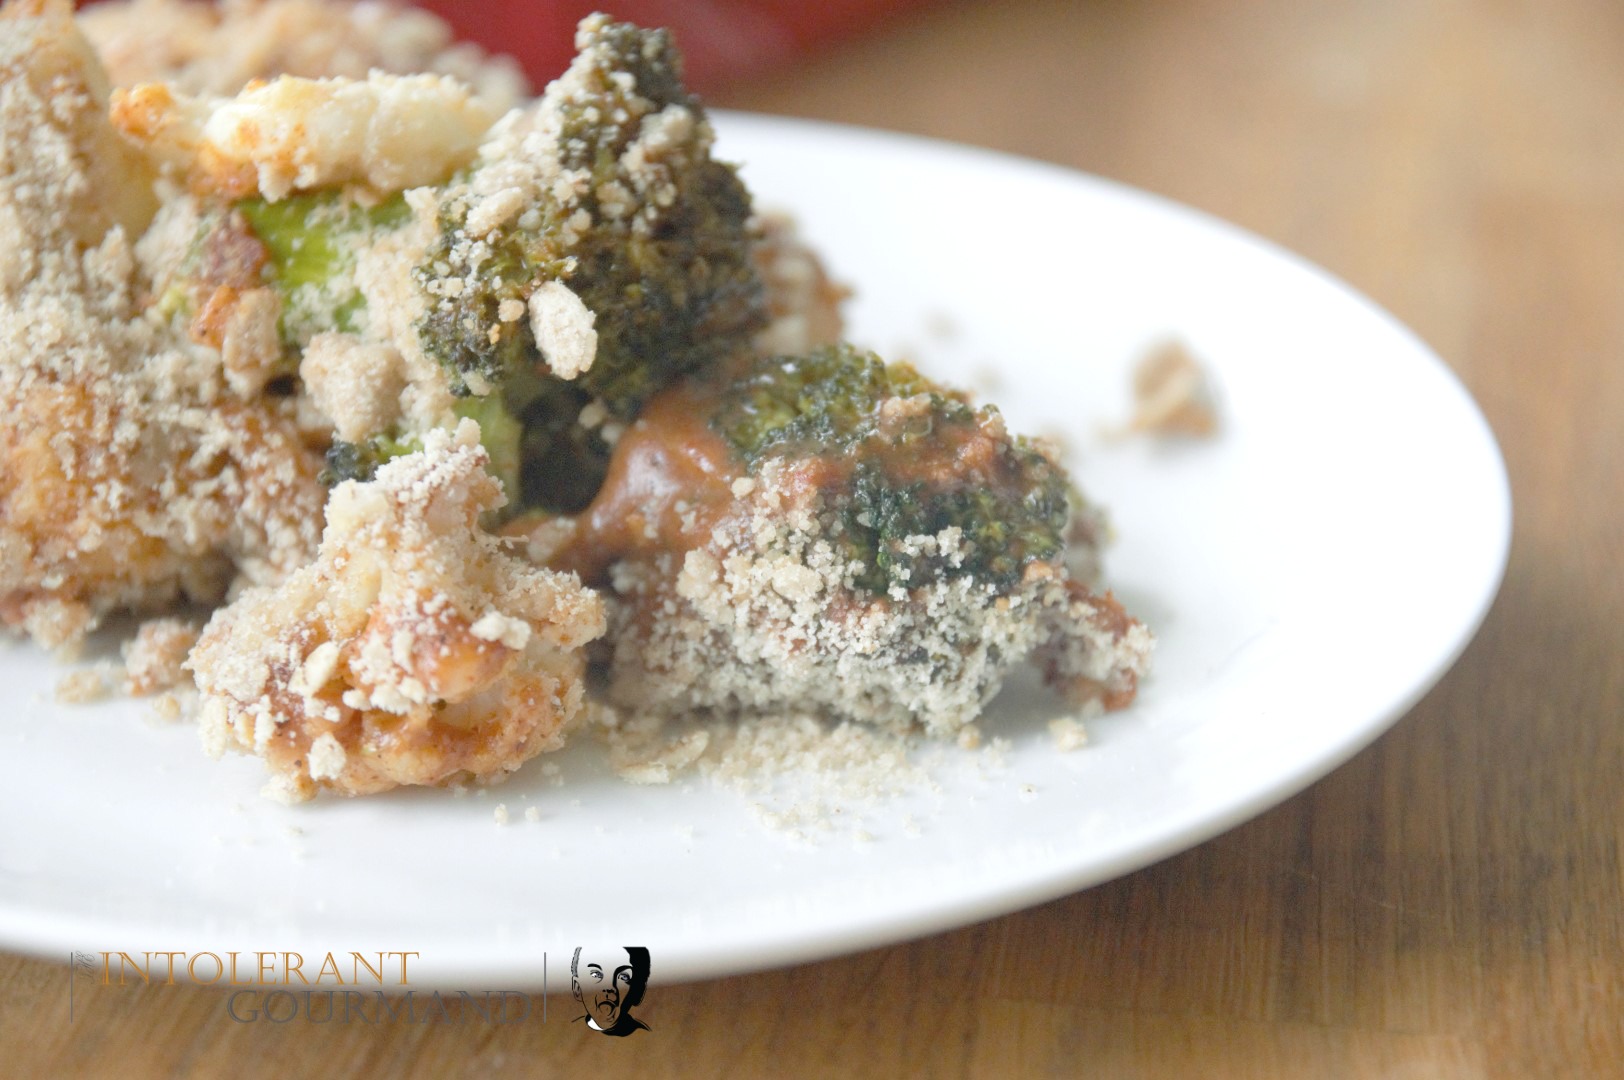 Broccoli Cauliflower Crumble - a delicious take on the classic crumble, given a gluten-free savoury twist! www.intolerantgourmand.com